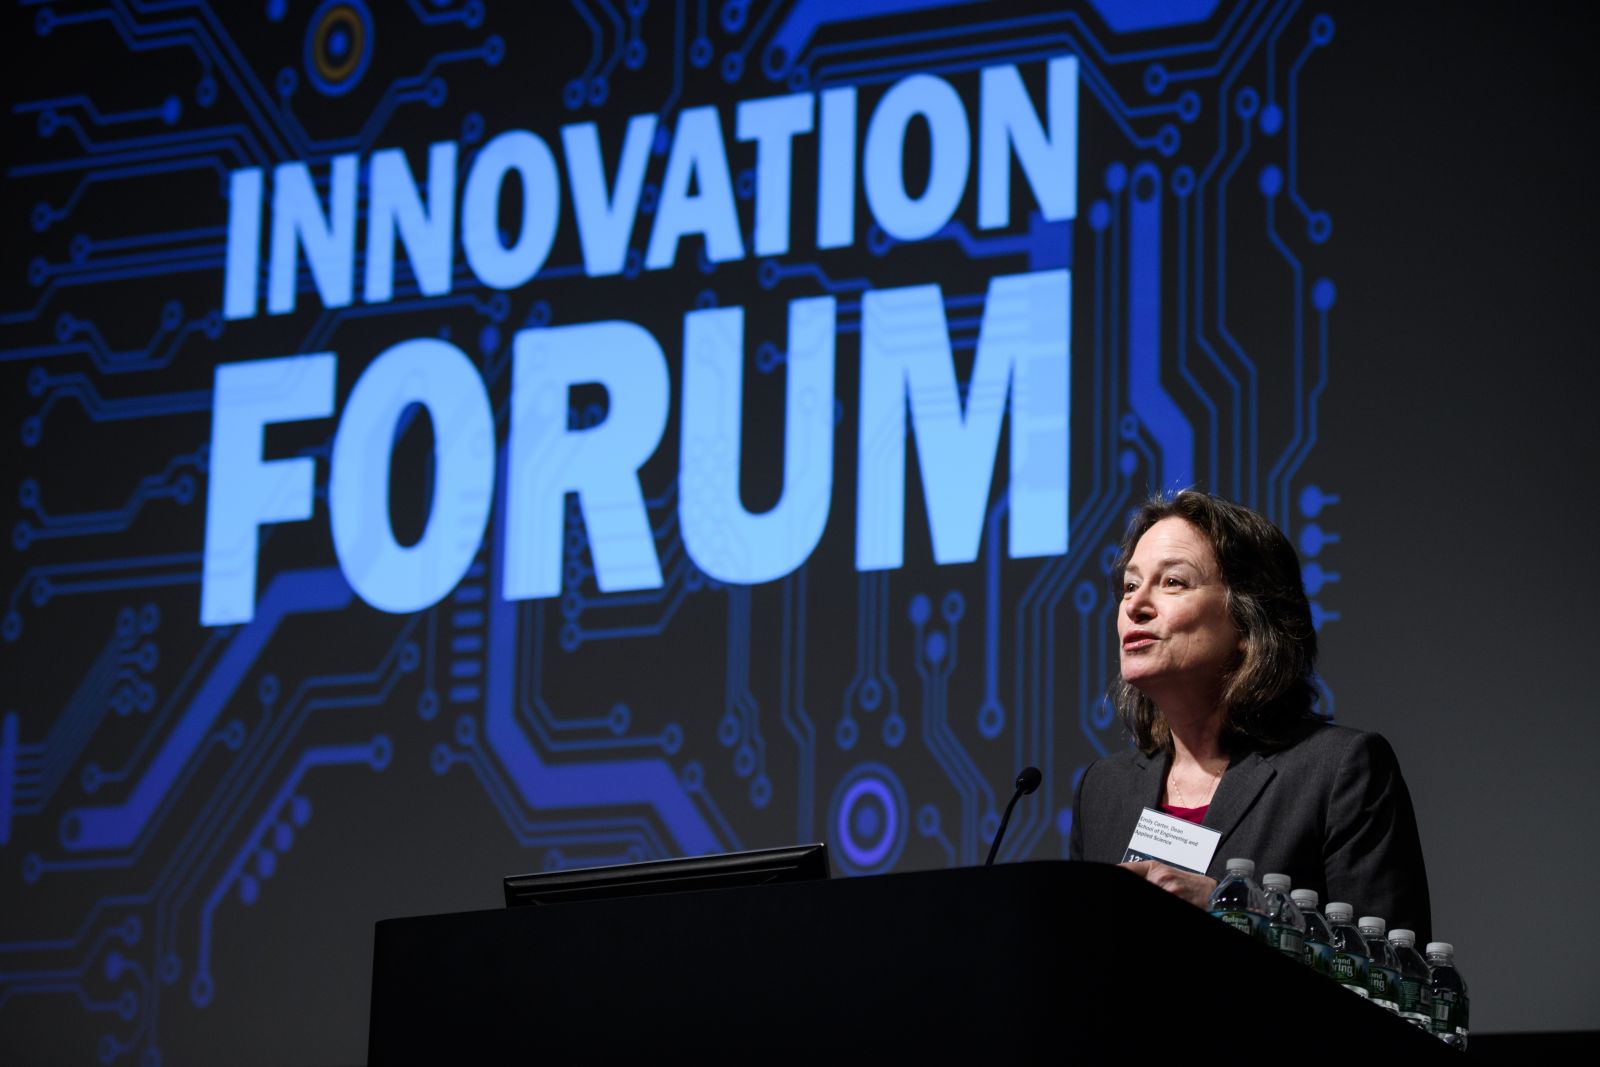 Dean Emily Carter speaks at Innovation Forum, with forum logo projected on the screen